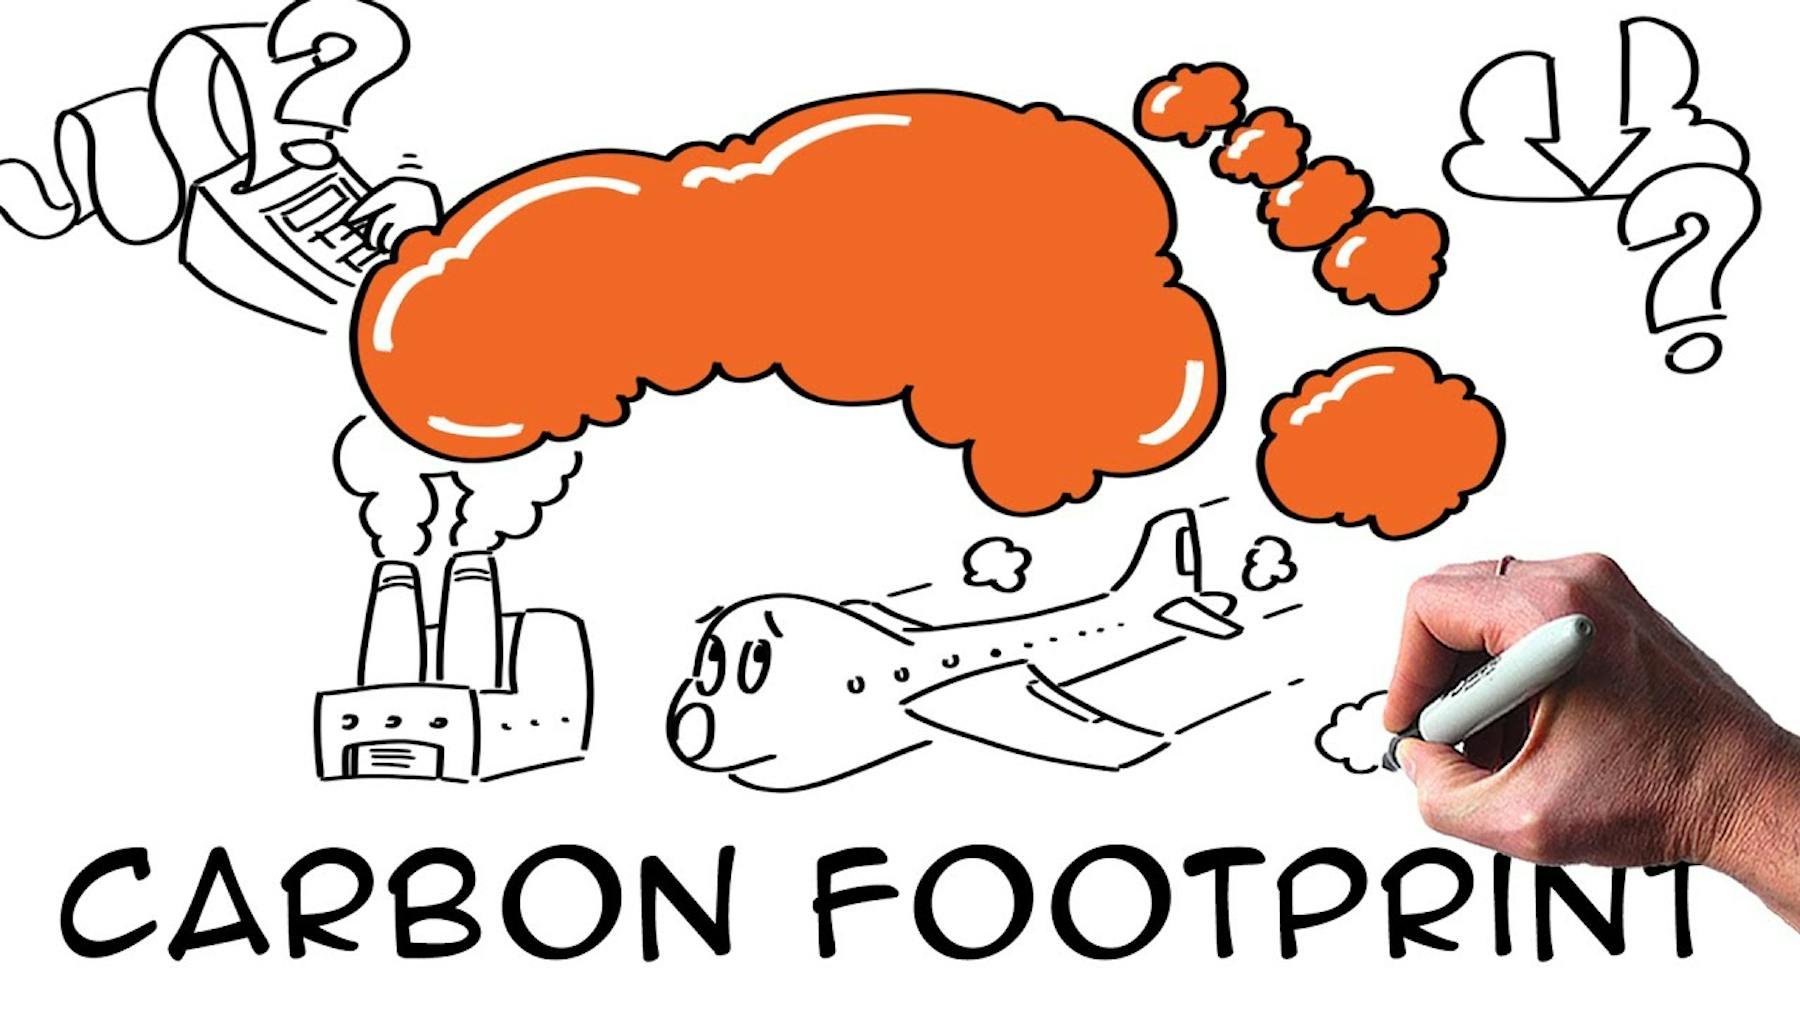 What's One Footprint? What the Climate Report Means For Real